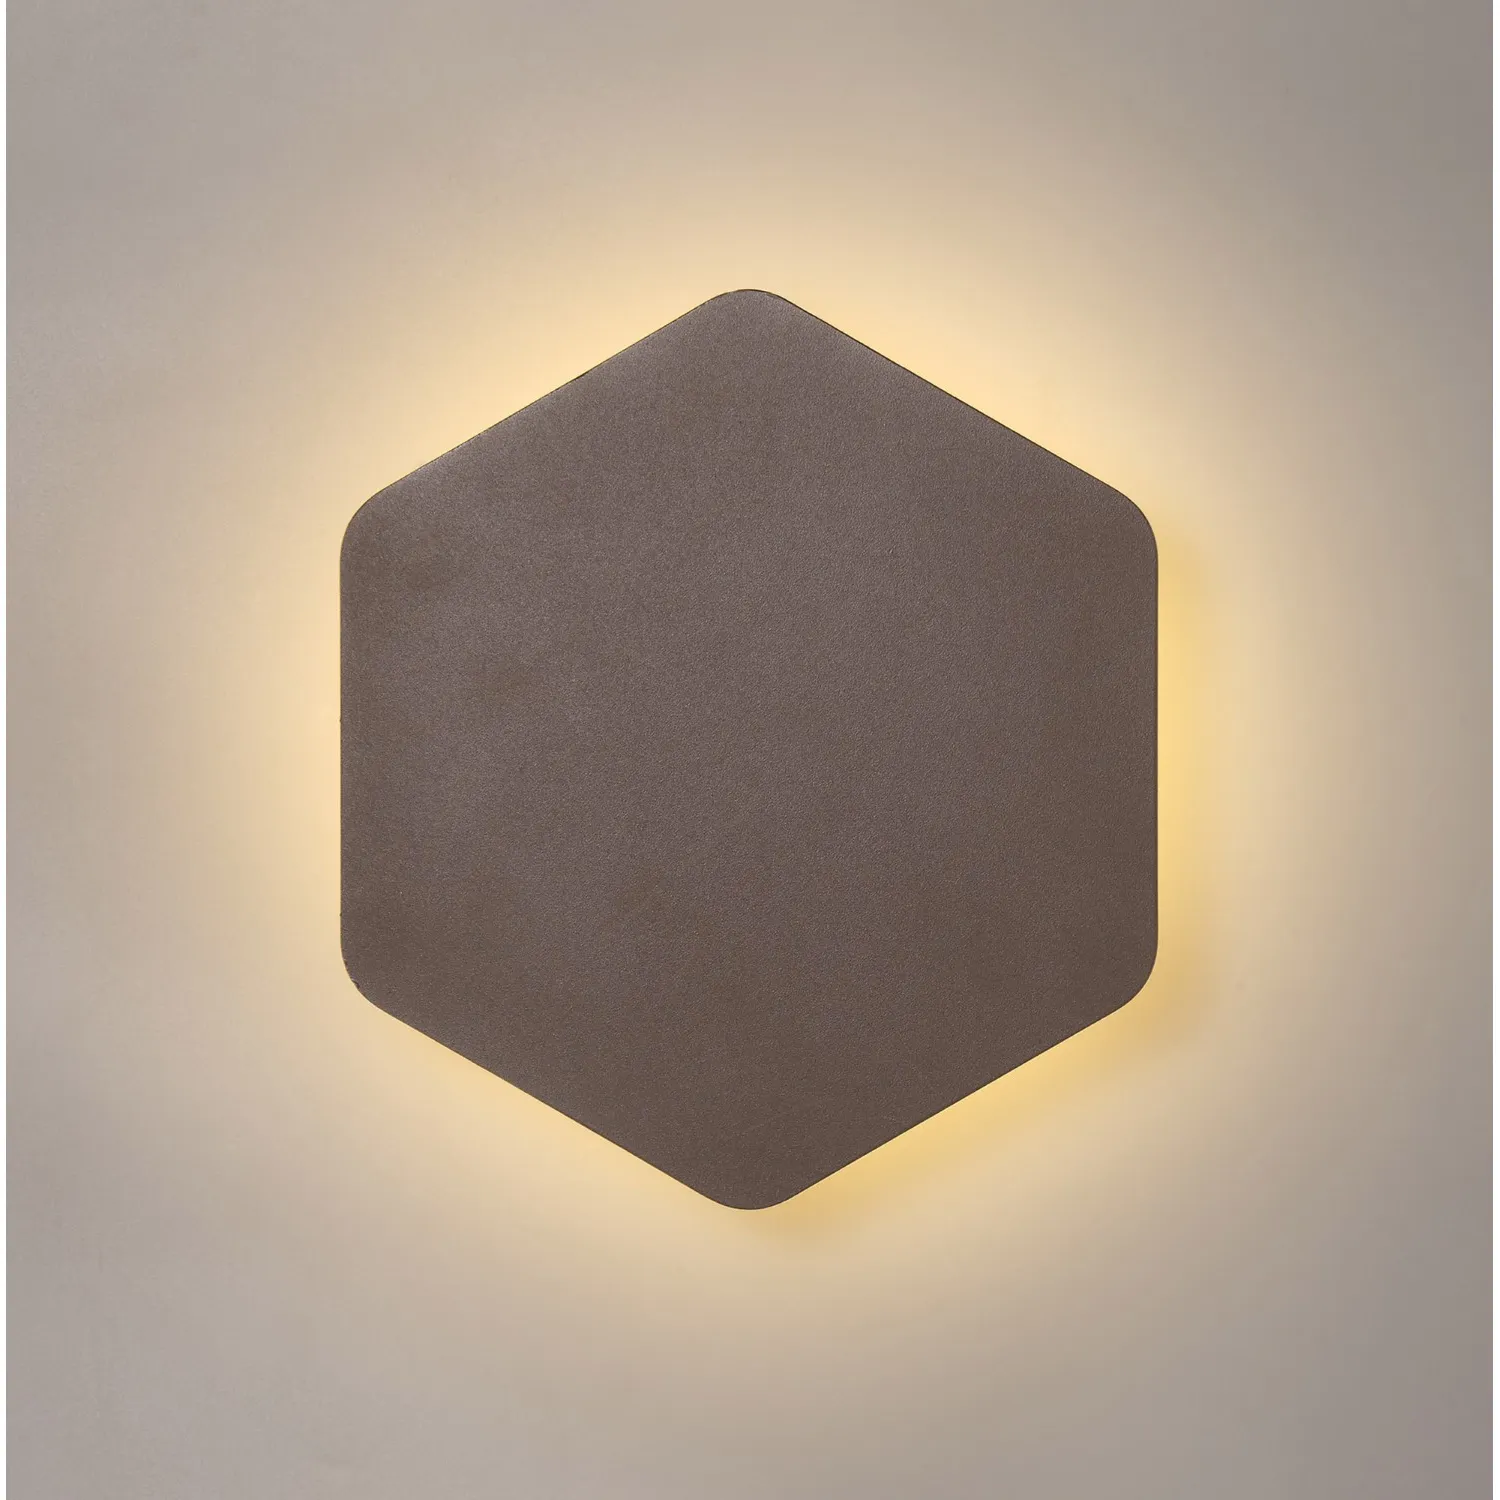 Edgware Magnetic Base Wall Lamp, 12W LED 3000K 498lm, 20 19cm Vertical Hexagonal Centre, Coffee Acrylic Frosted Diffuser